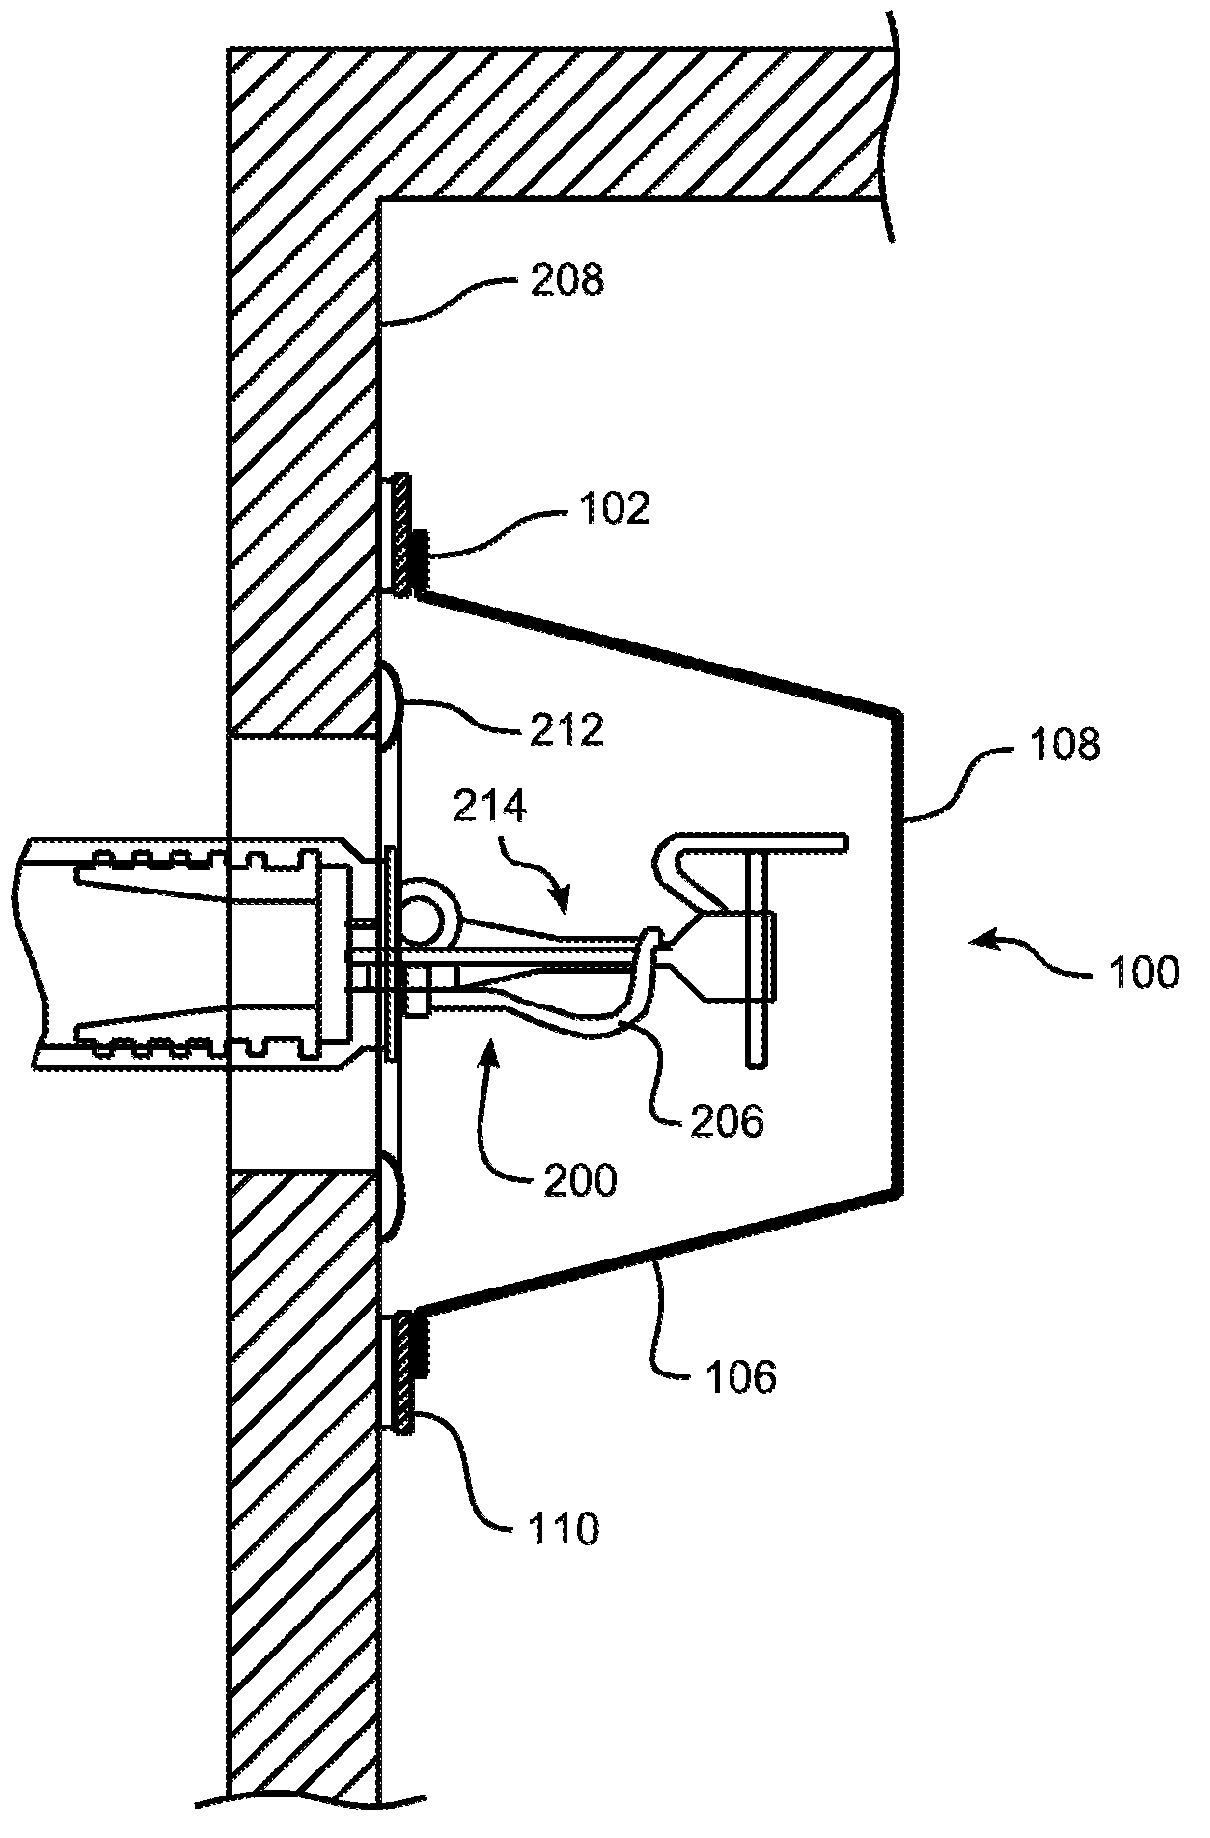 Apparatus for reducing the incidence of tampering with automatic fire sprinkler assemblies